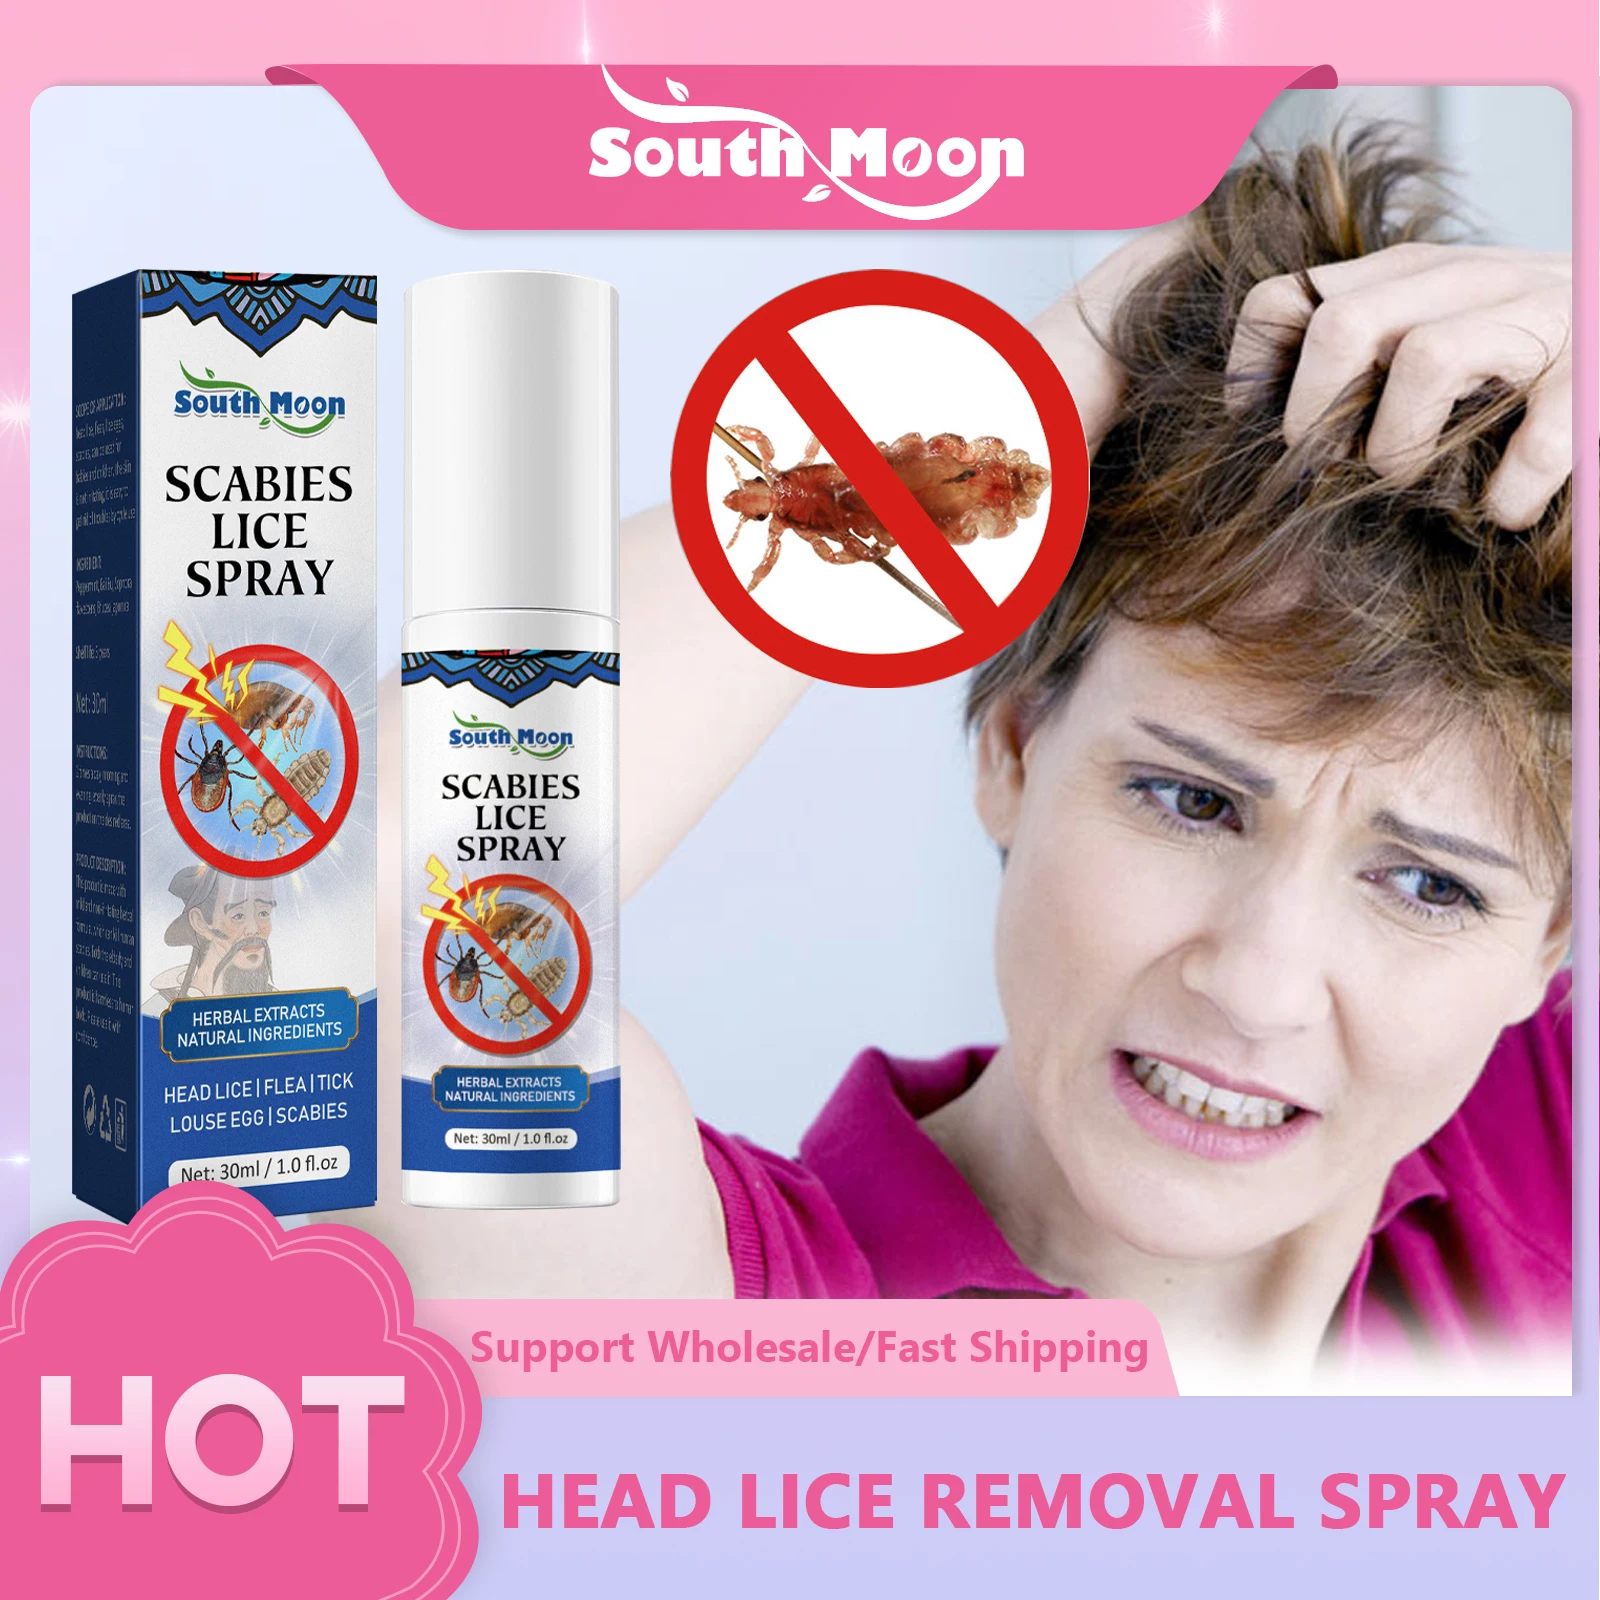 

Head Scabies Lice Removal Spray Anti-itch Anti-pruritus Antibacterial Remove Mites Fleas Tick Louse Eggs Pubic Lice Hair Care